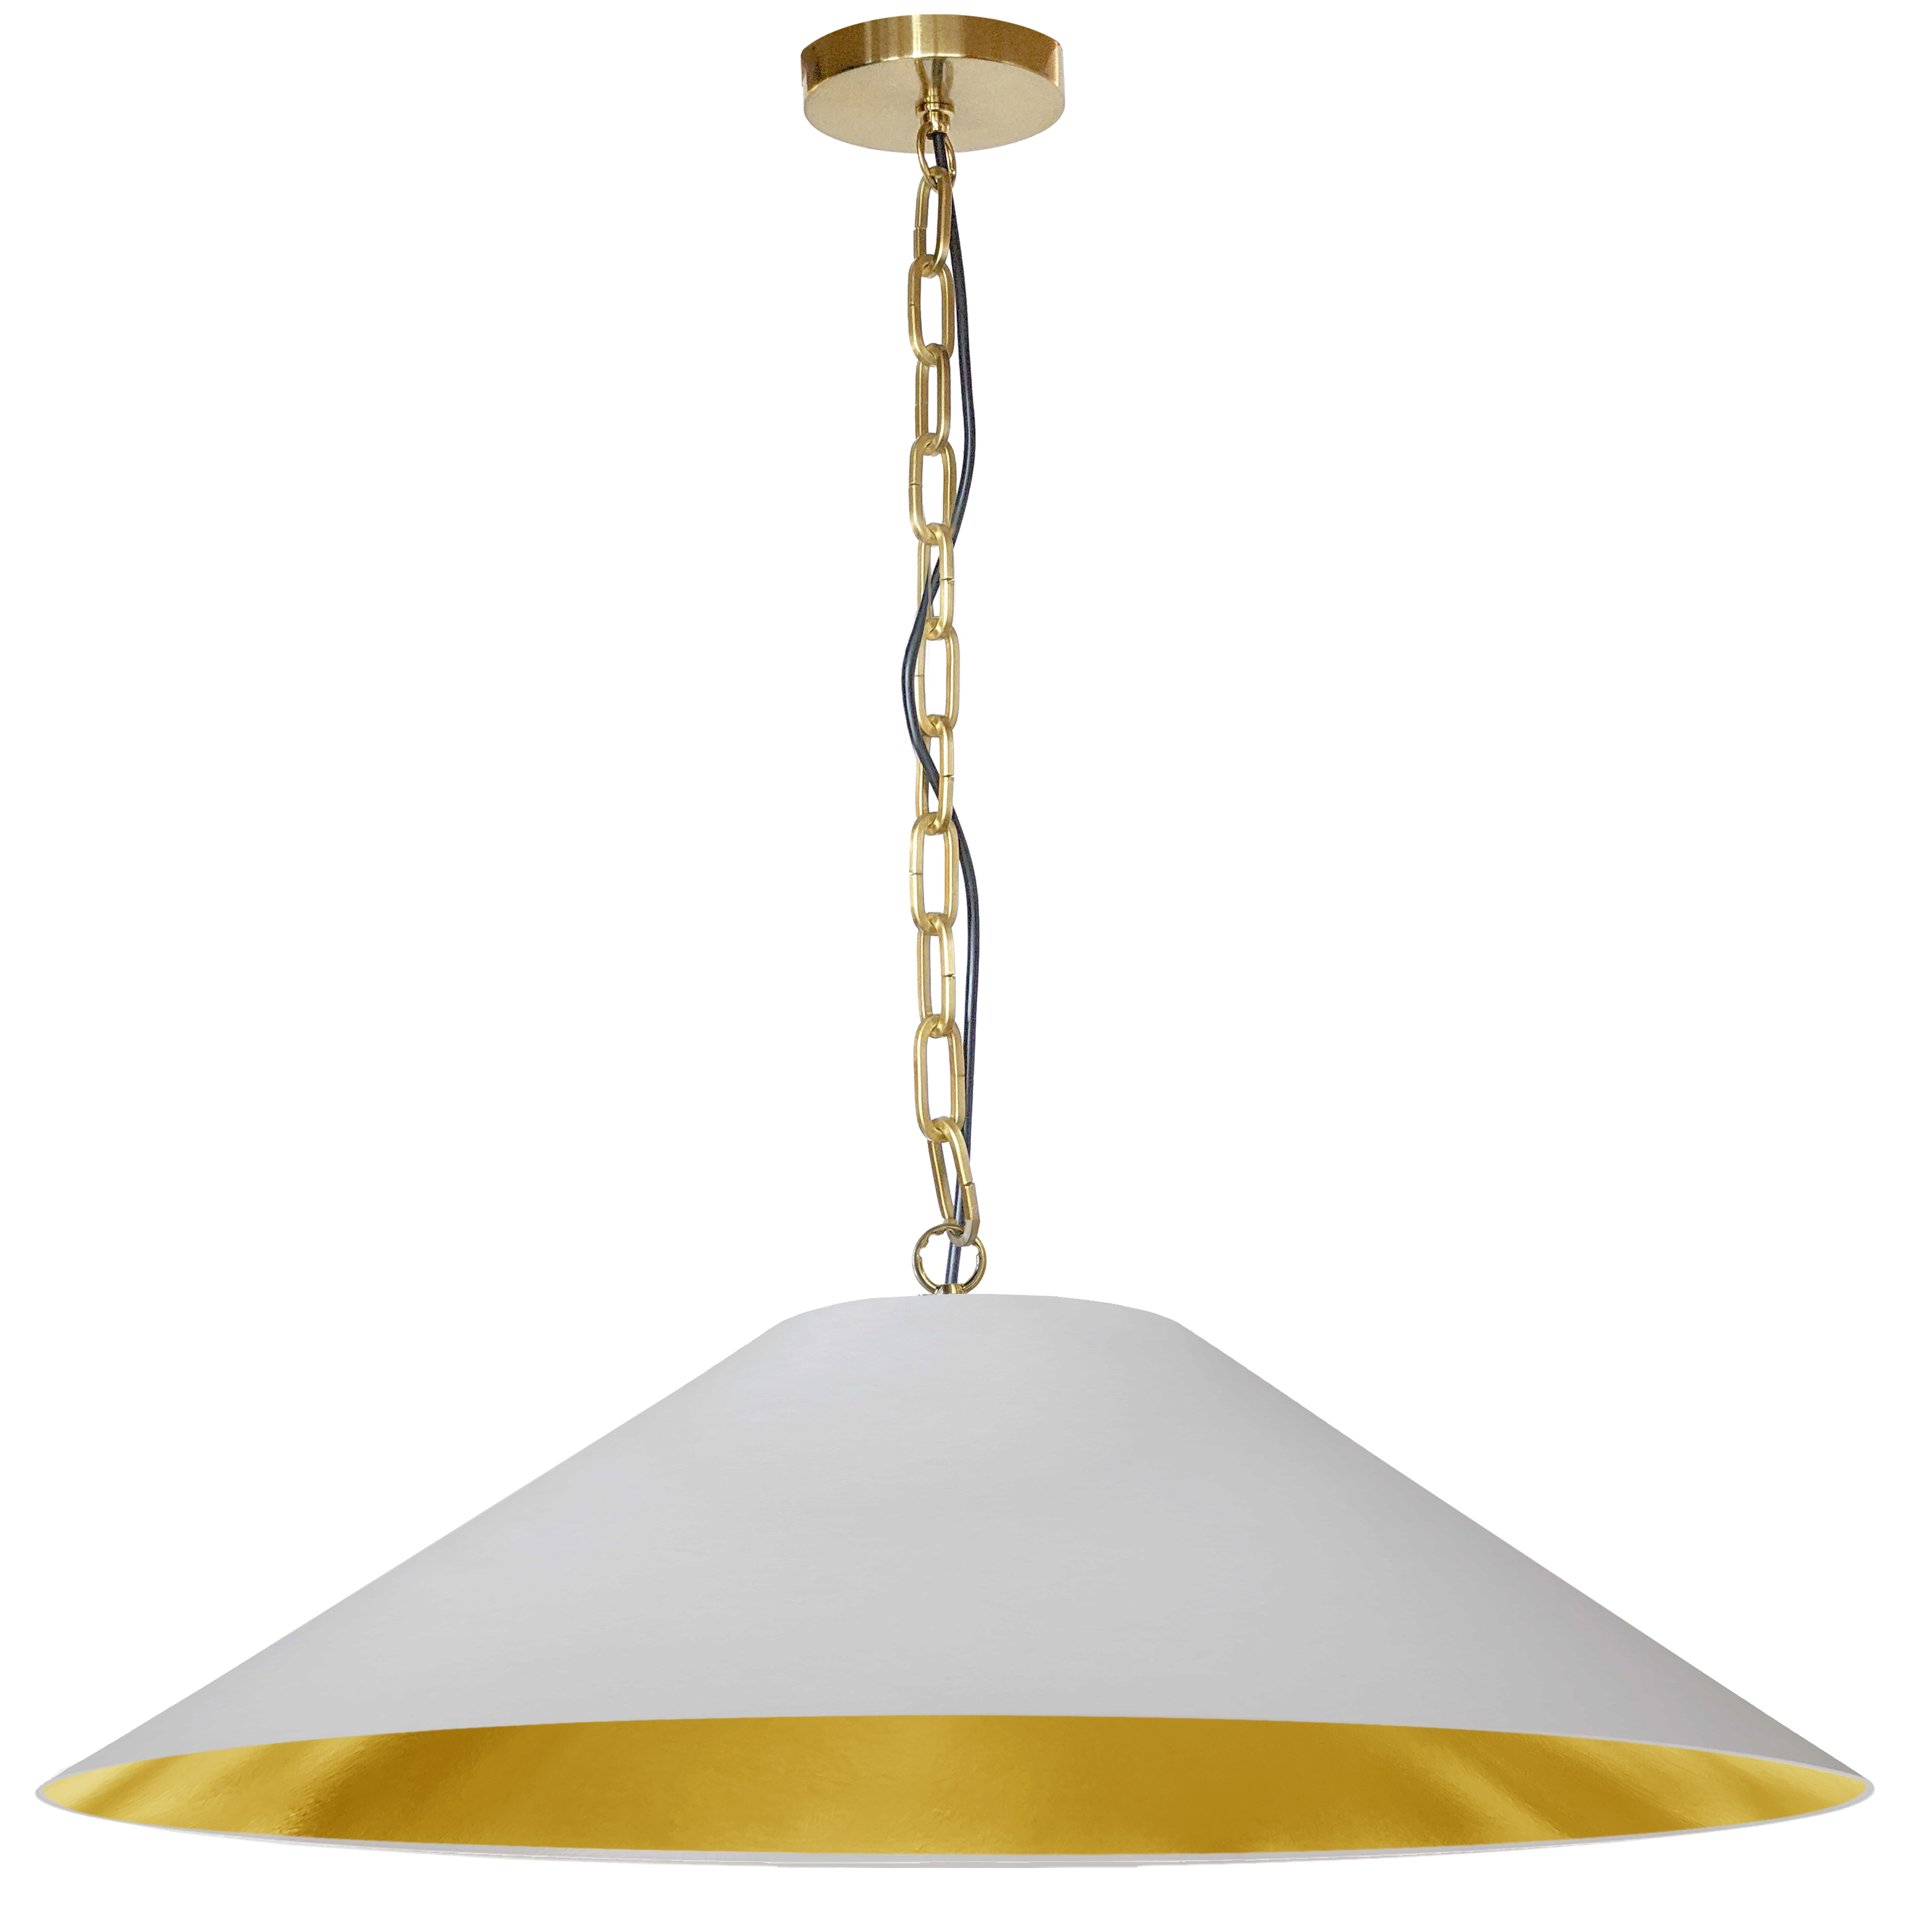 The Presley family of lighting combines a noticeable footprint with a sleek profile that balances its weight. The effect is spacious, and based on a classic profile that will blend into many décor schemes from mid-century to ultra-modern. The chain drop leads to a metal base, discrete inside a broad-angled empire style fabric shade. Color options between the metal finish and both the inner and outer surfaces of the fabric shade range from monochromatic to strikingly contrasting combinations. Presley lighting adds a welcome glow of sophisticated luxury to your kitchen or living room, or a main hallway.